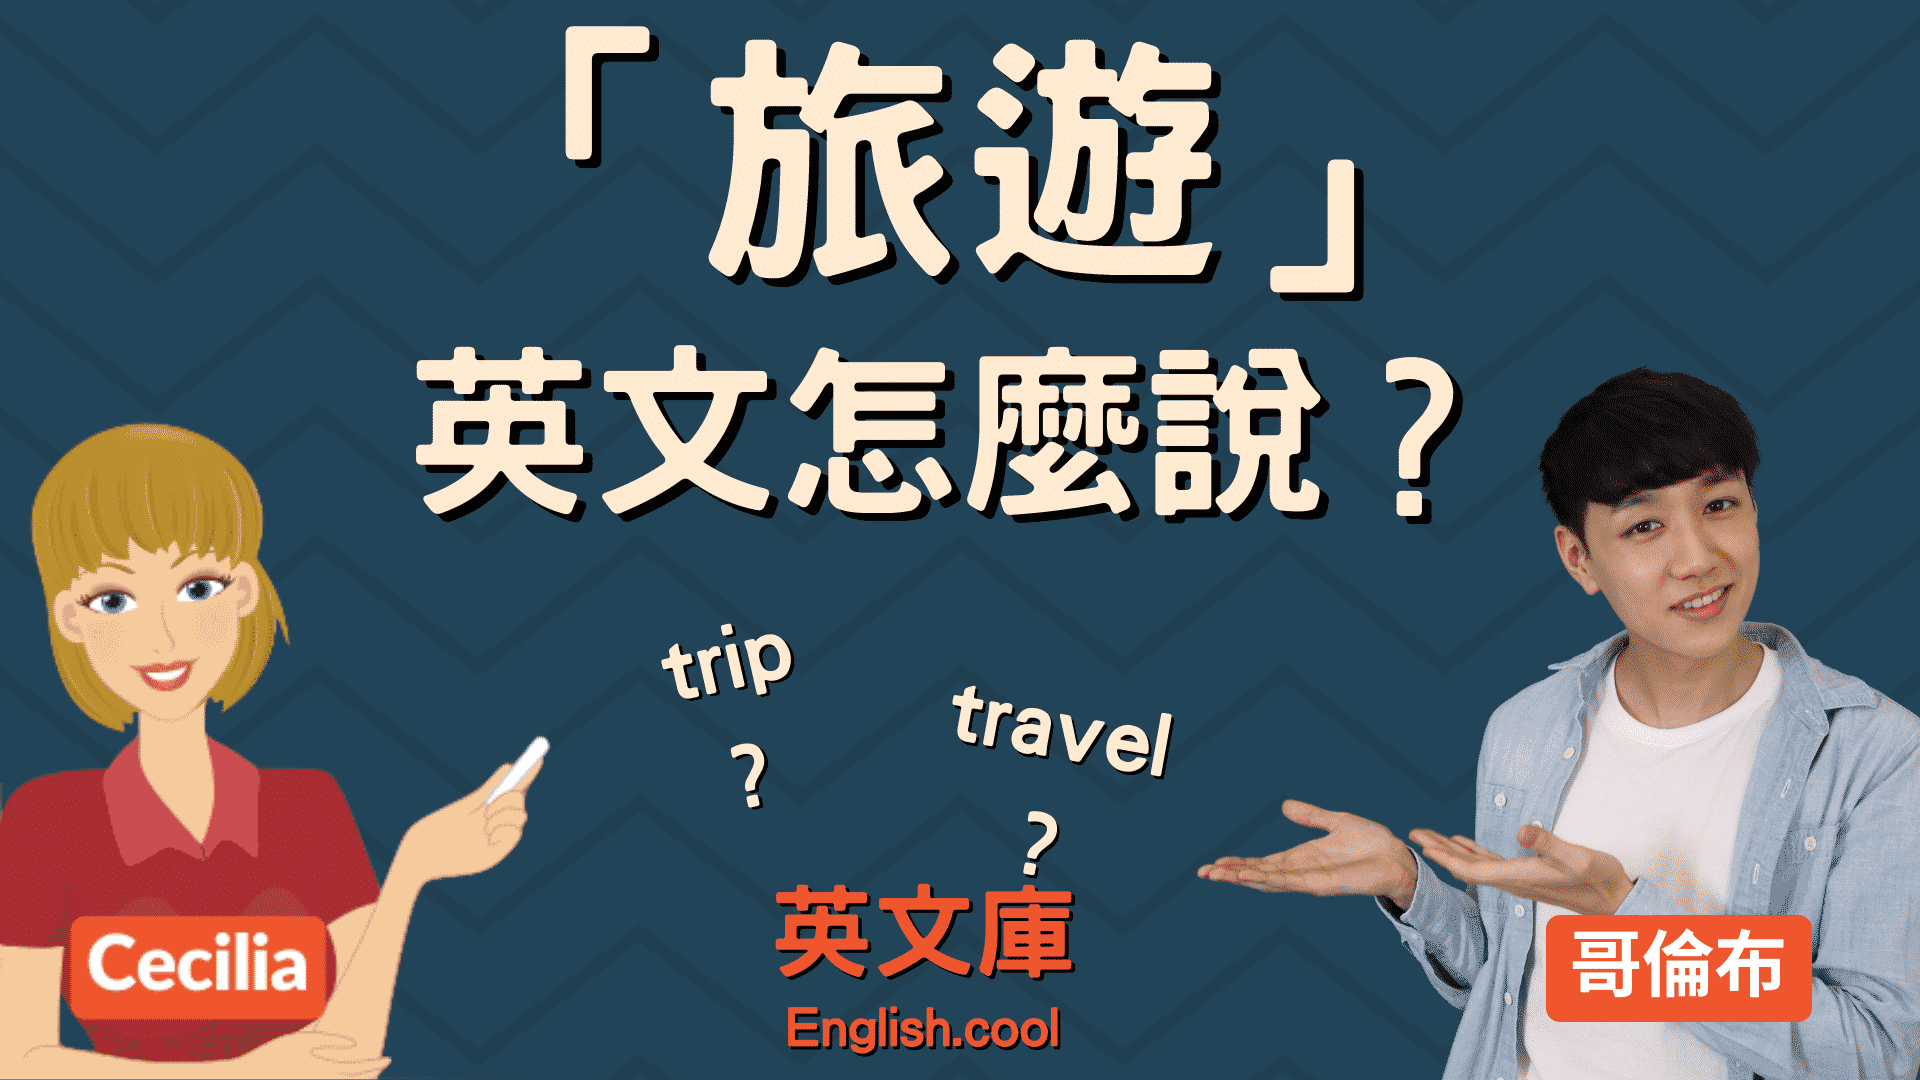 You are currently viewing 「旅遊、旅行」英文怎麼說？trip? journey? travel? tour?